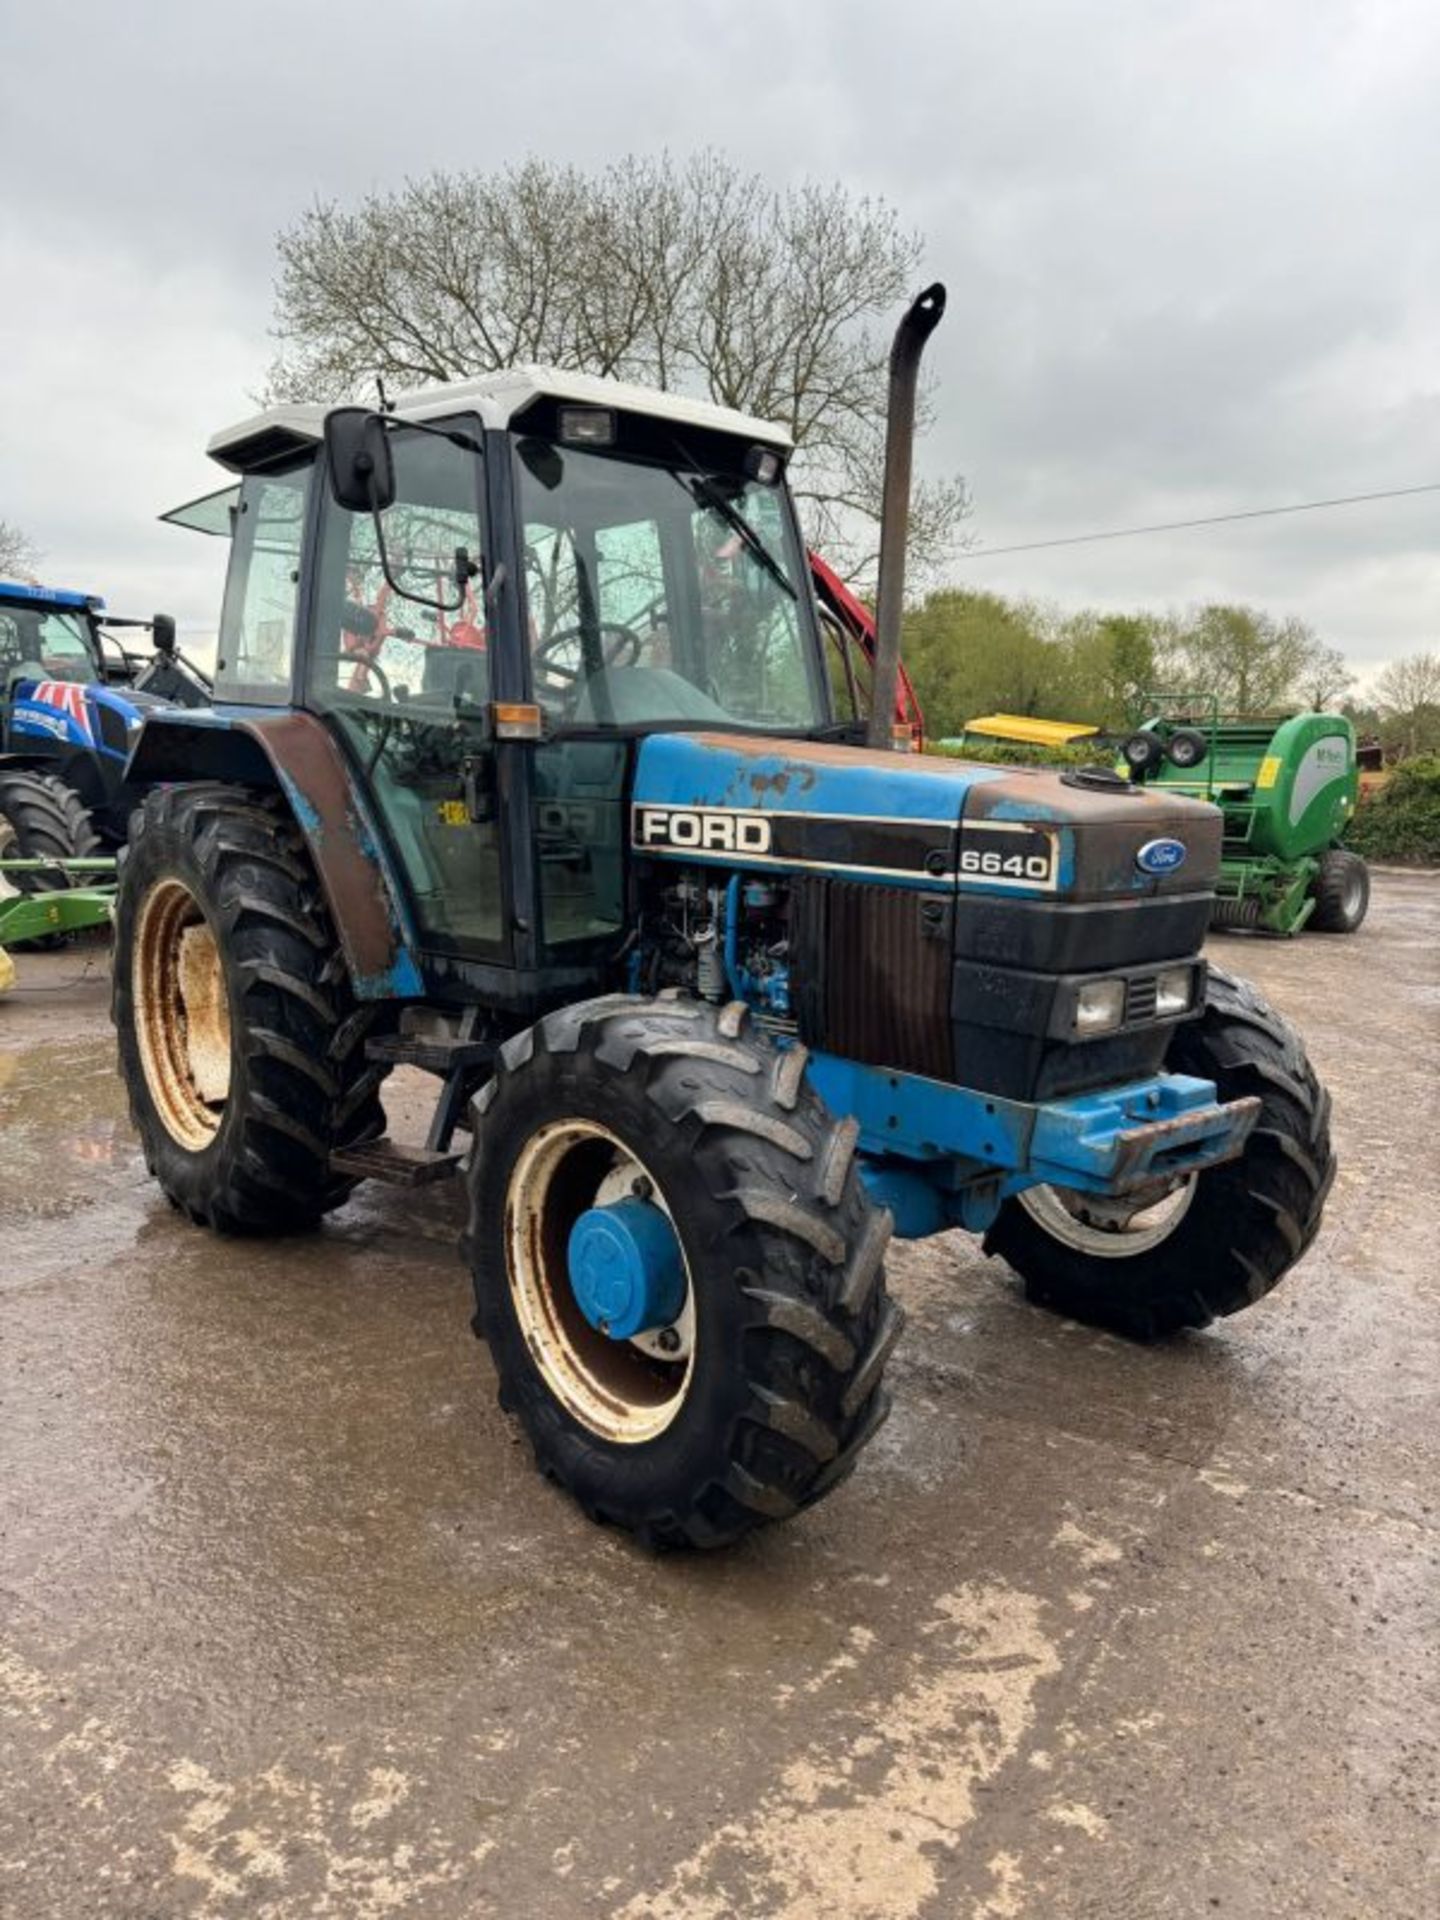 RELIABLE FORD 6640 SL TRACTOR READY FOR ACTION! - Image 2 of 12